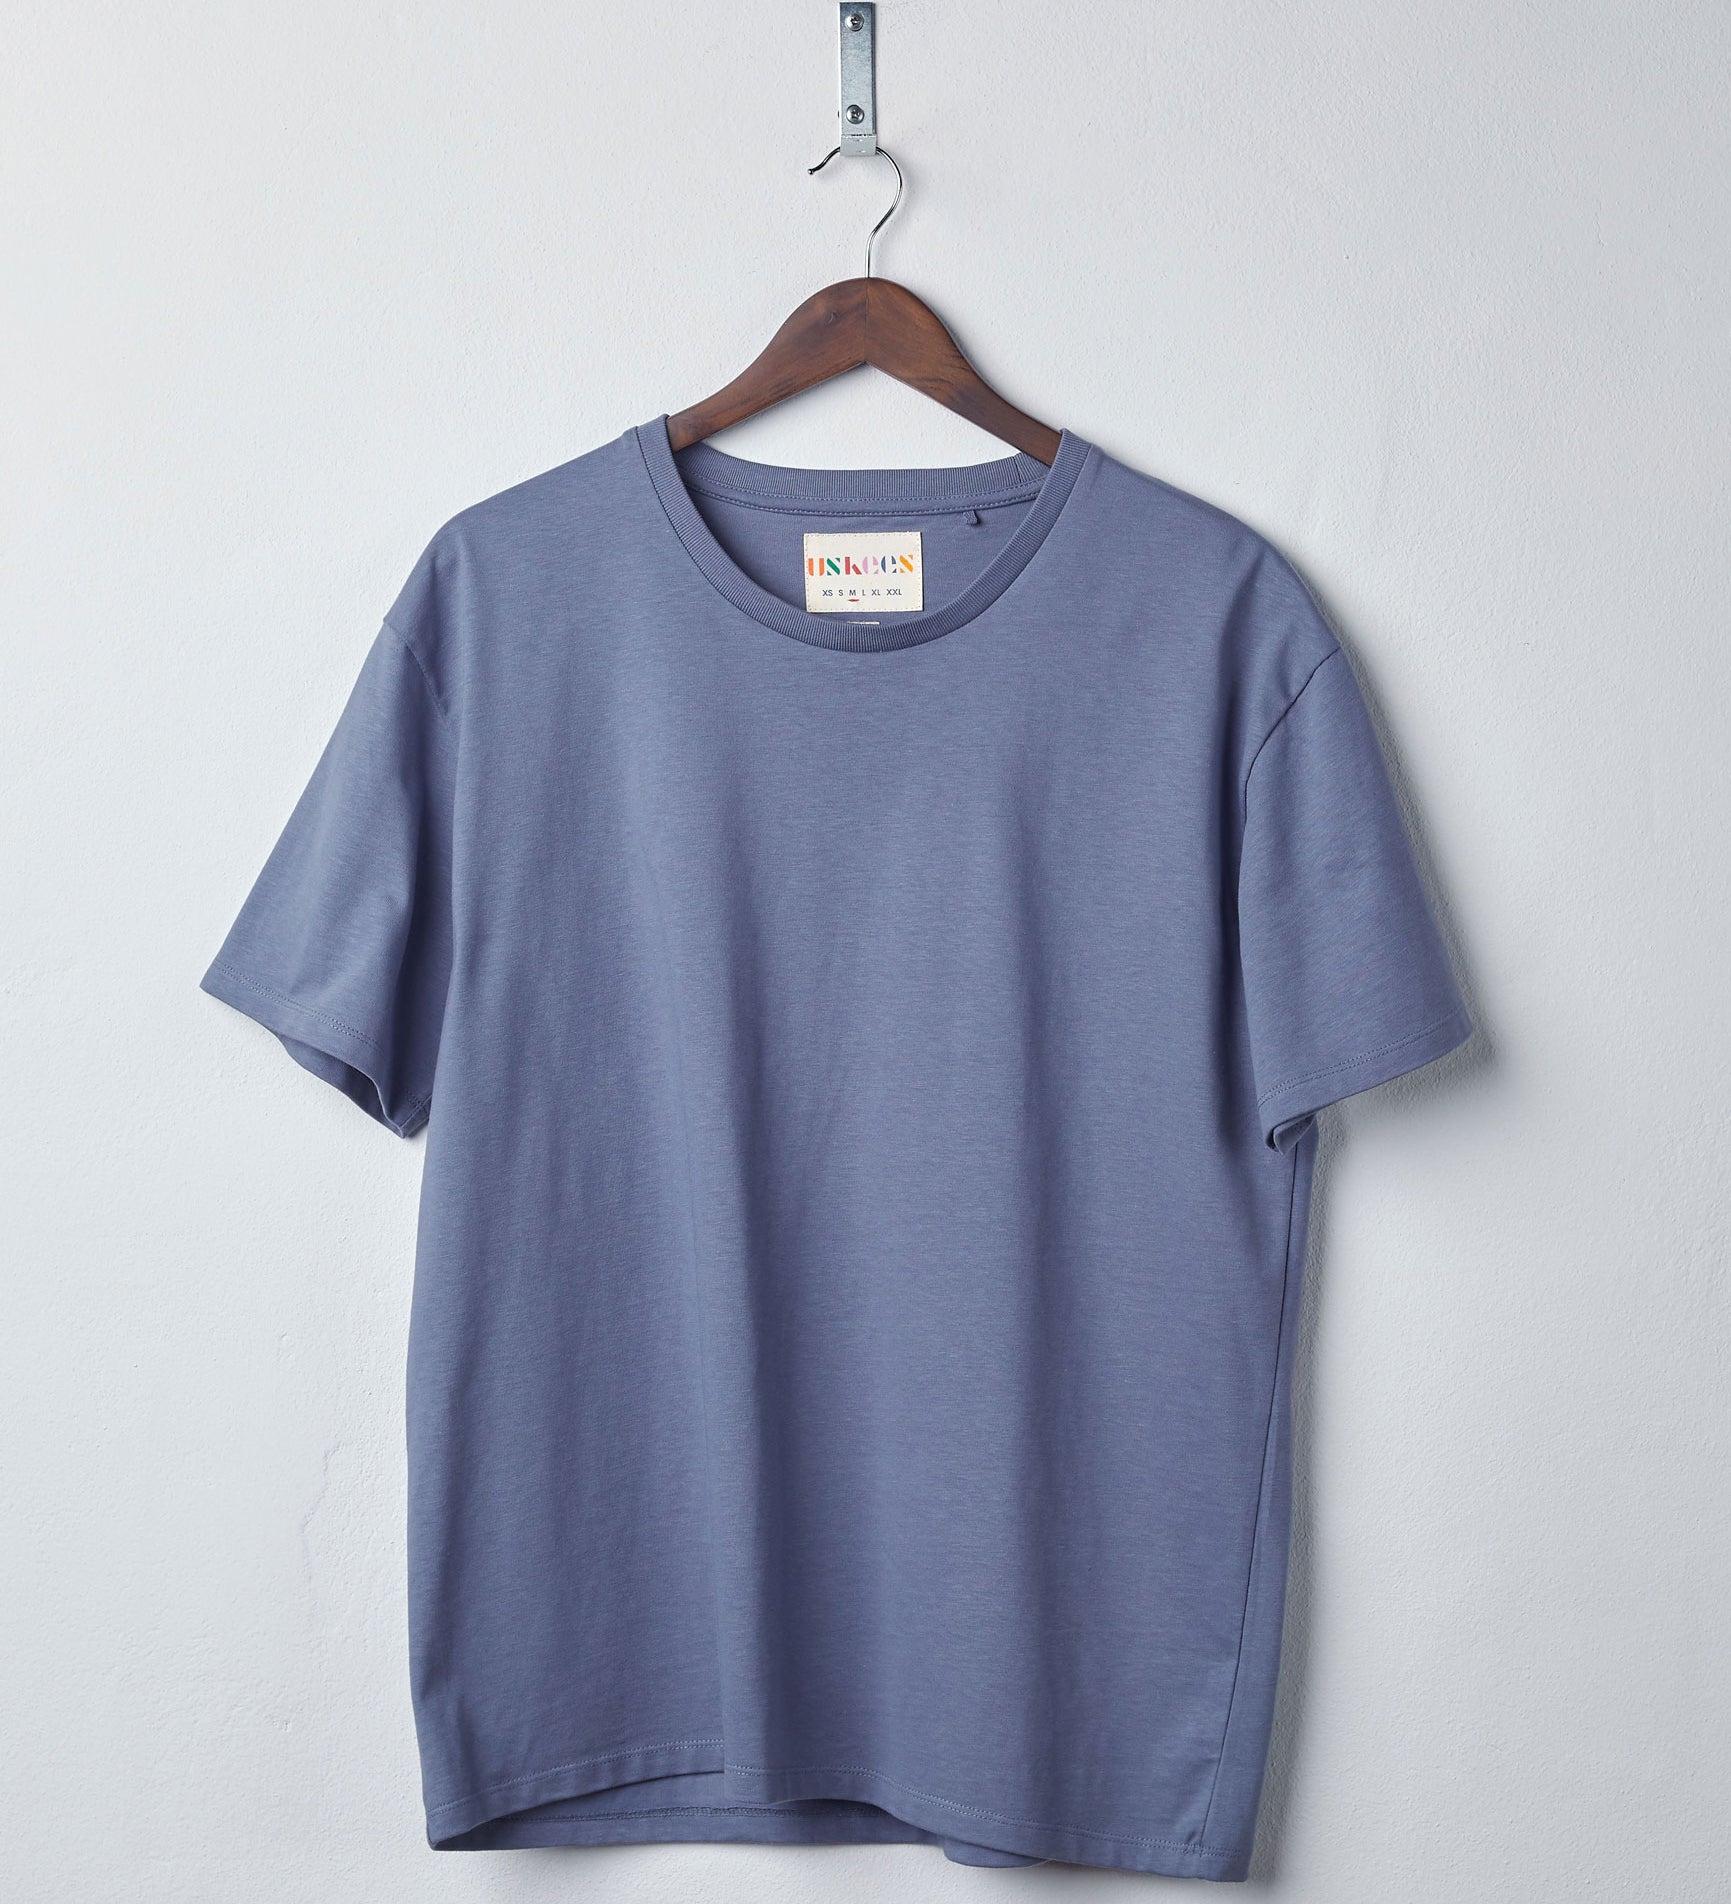 Front view of teal organic cotton #7006 jersey T-shirt by Uskees, presented on hanger against white background. 